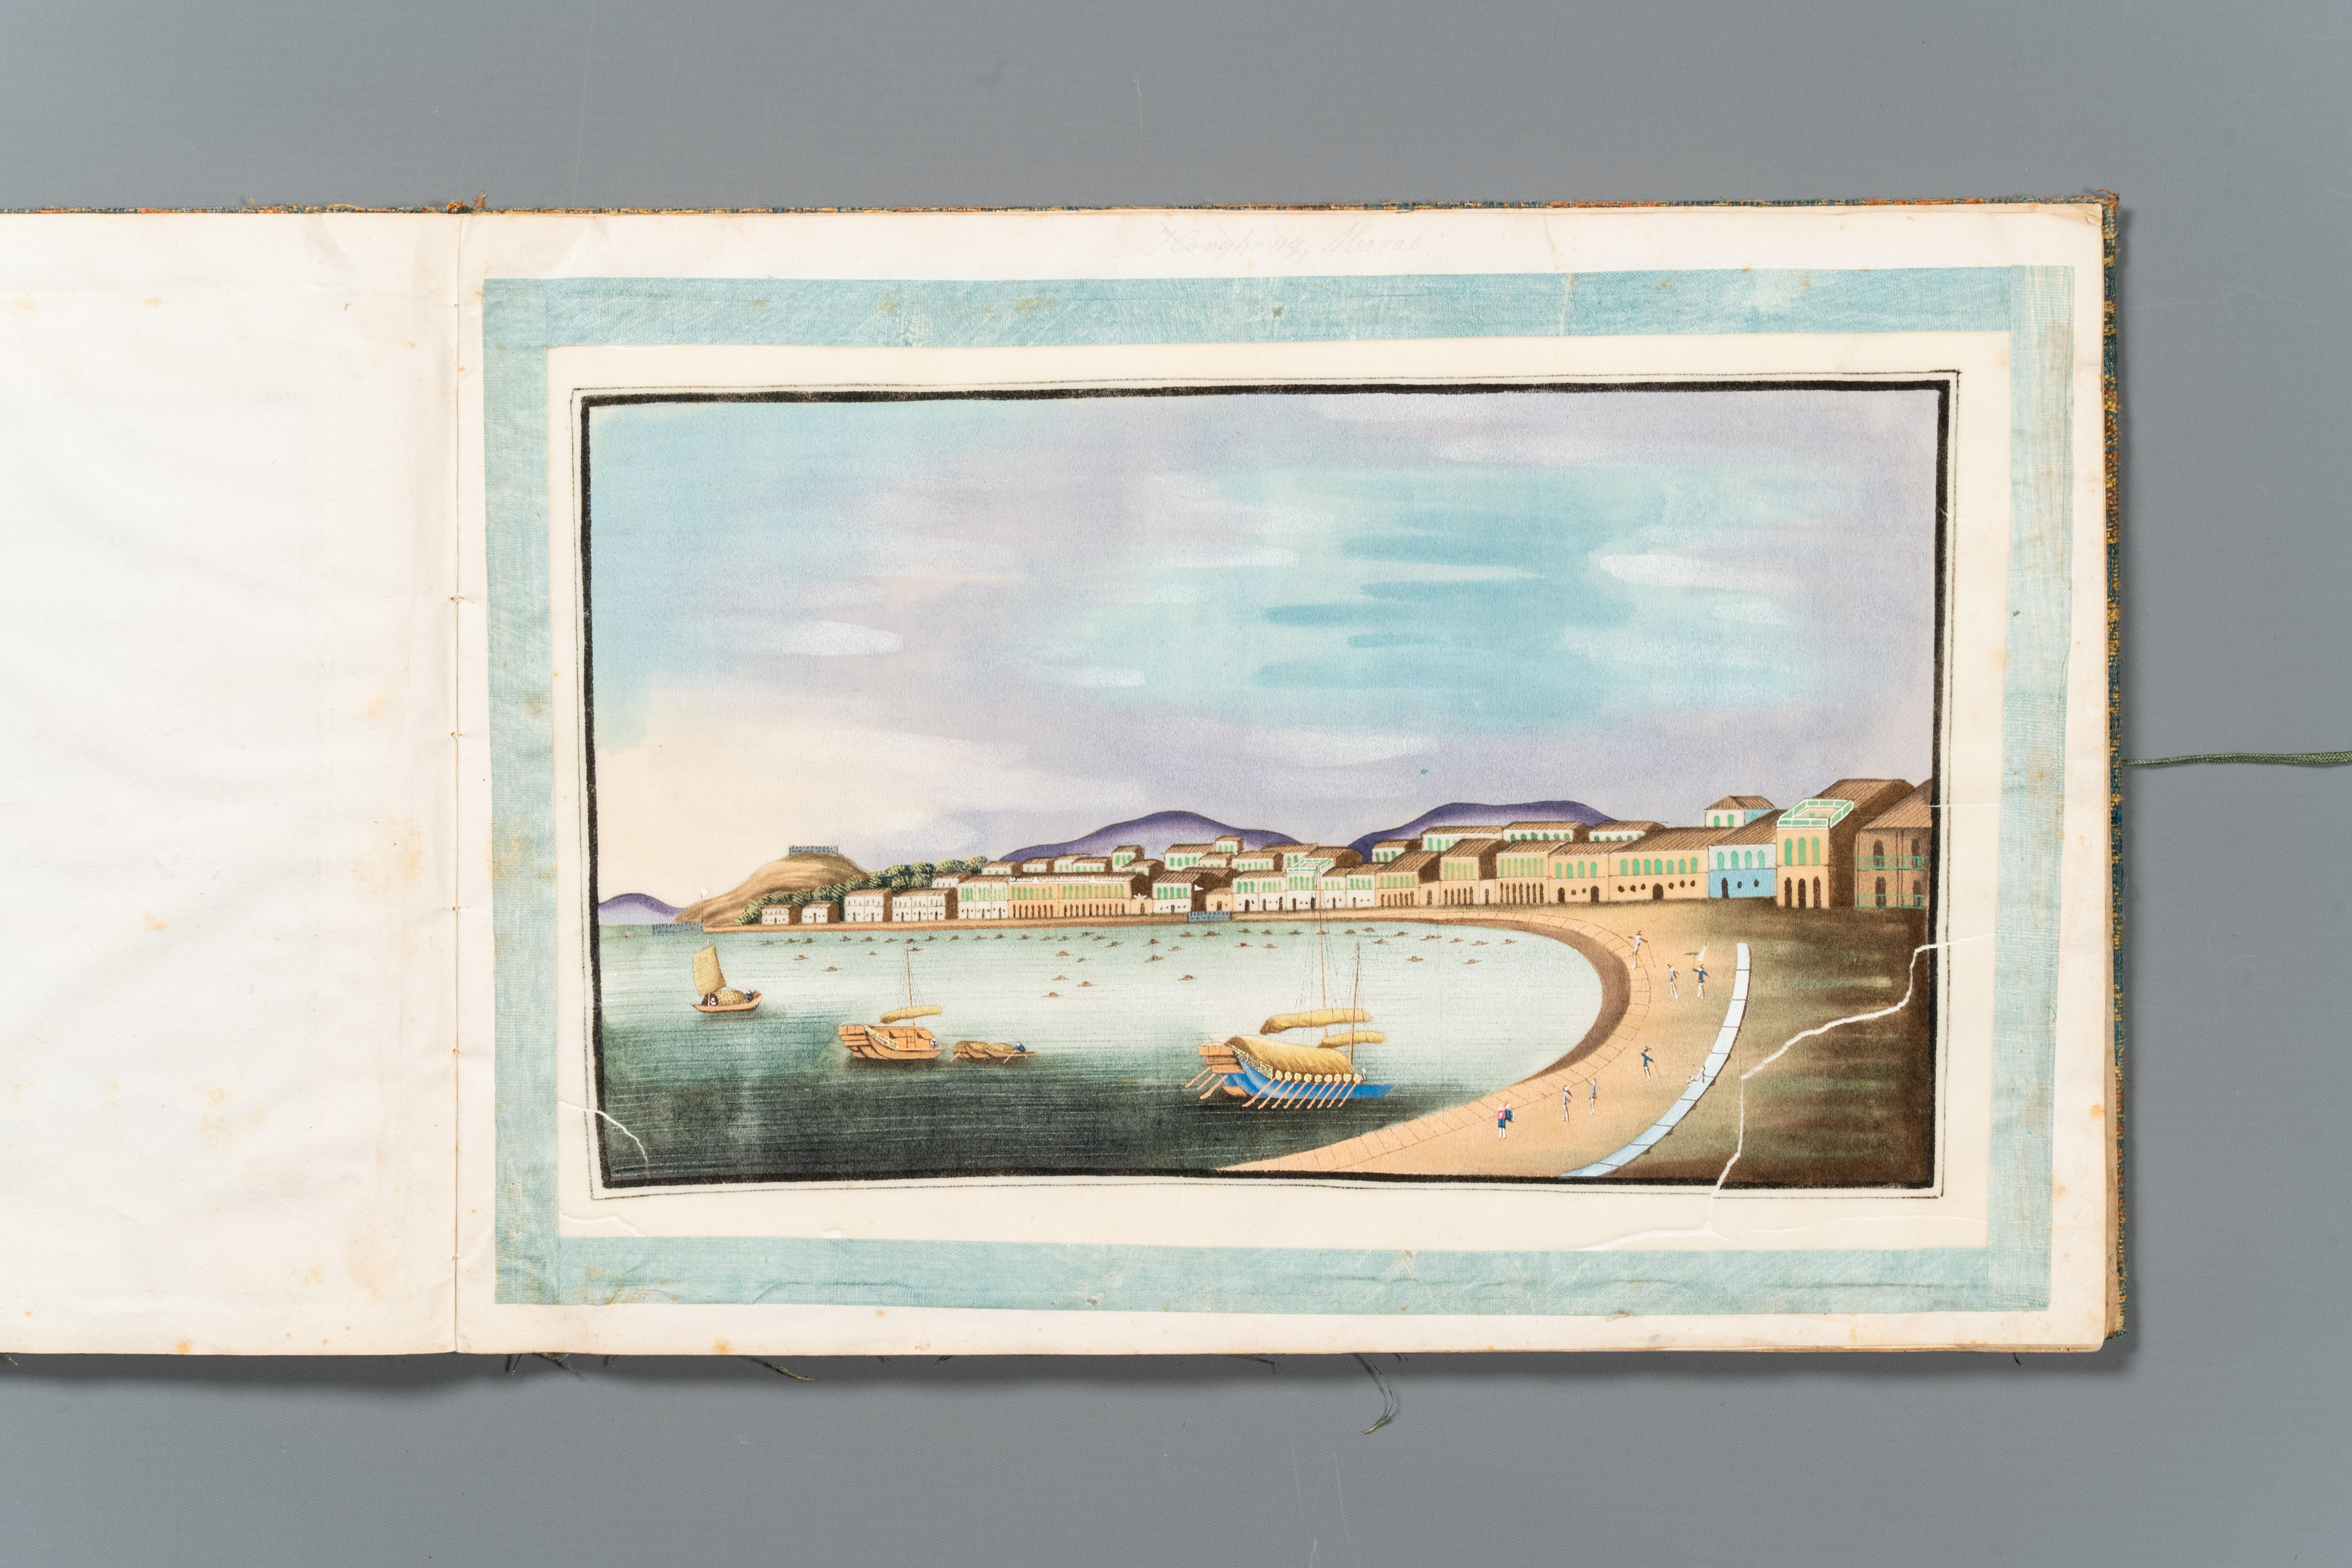 A rare album with Chinese rice paper paintings of 'Hong' views, figures and ships, Canton, Foekhing - Image 4 of 14